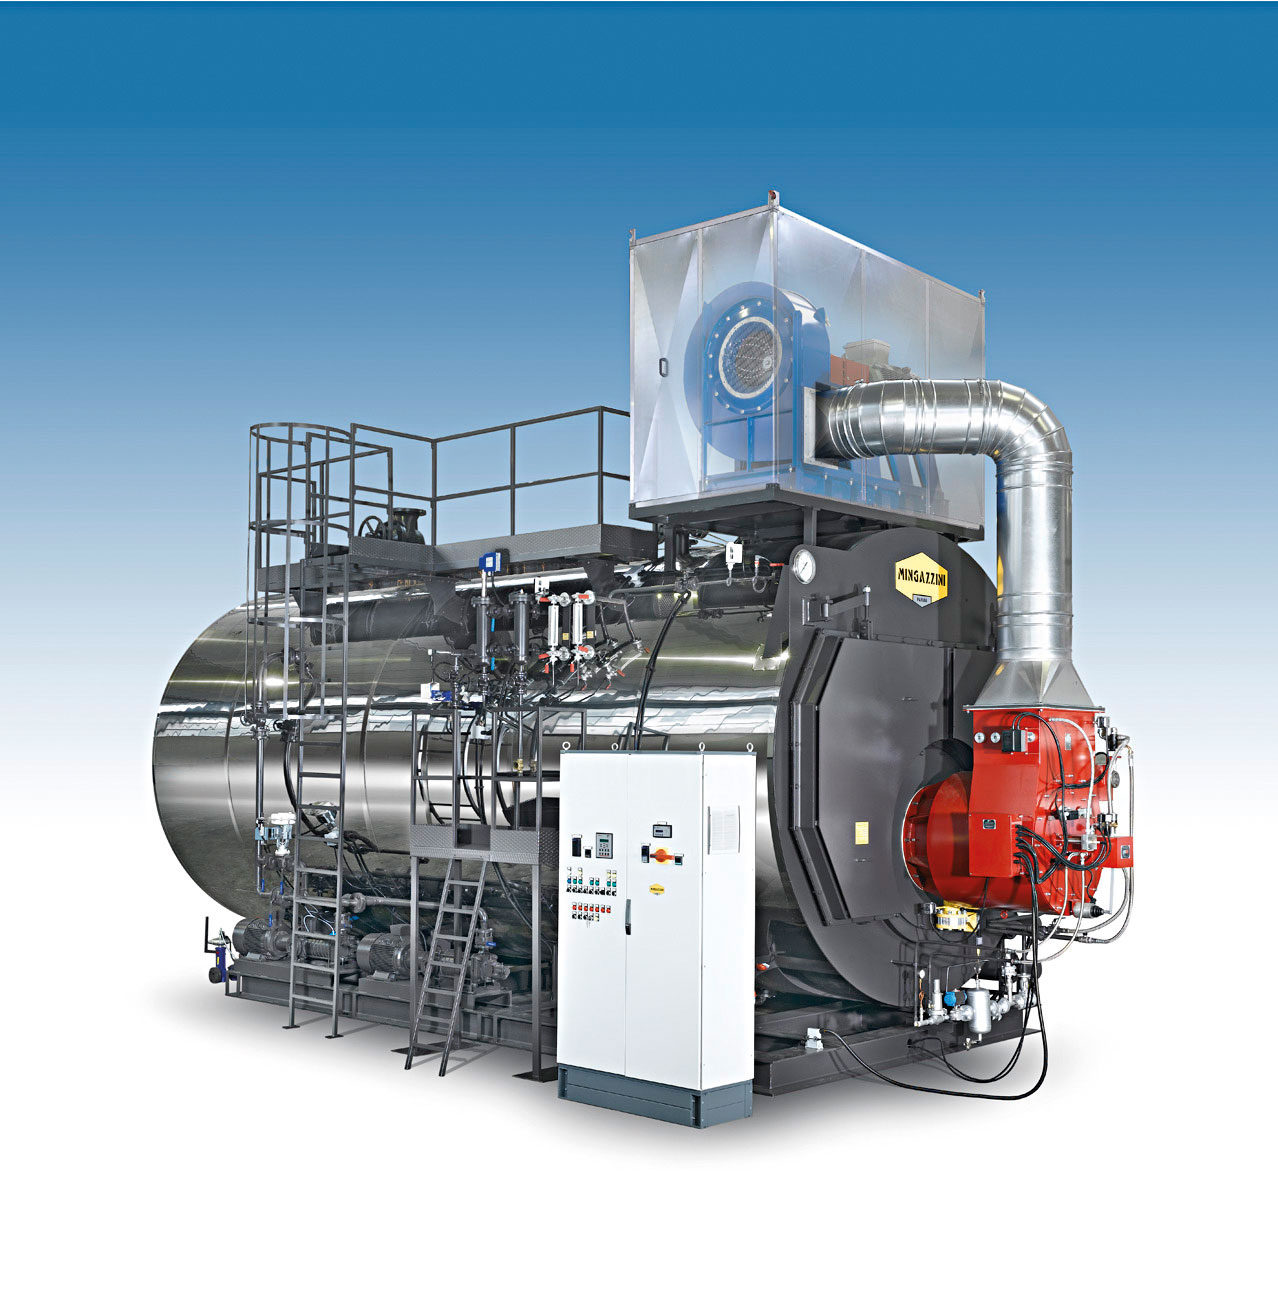 About steam boiler фото 79